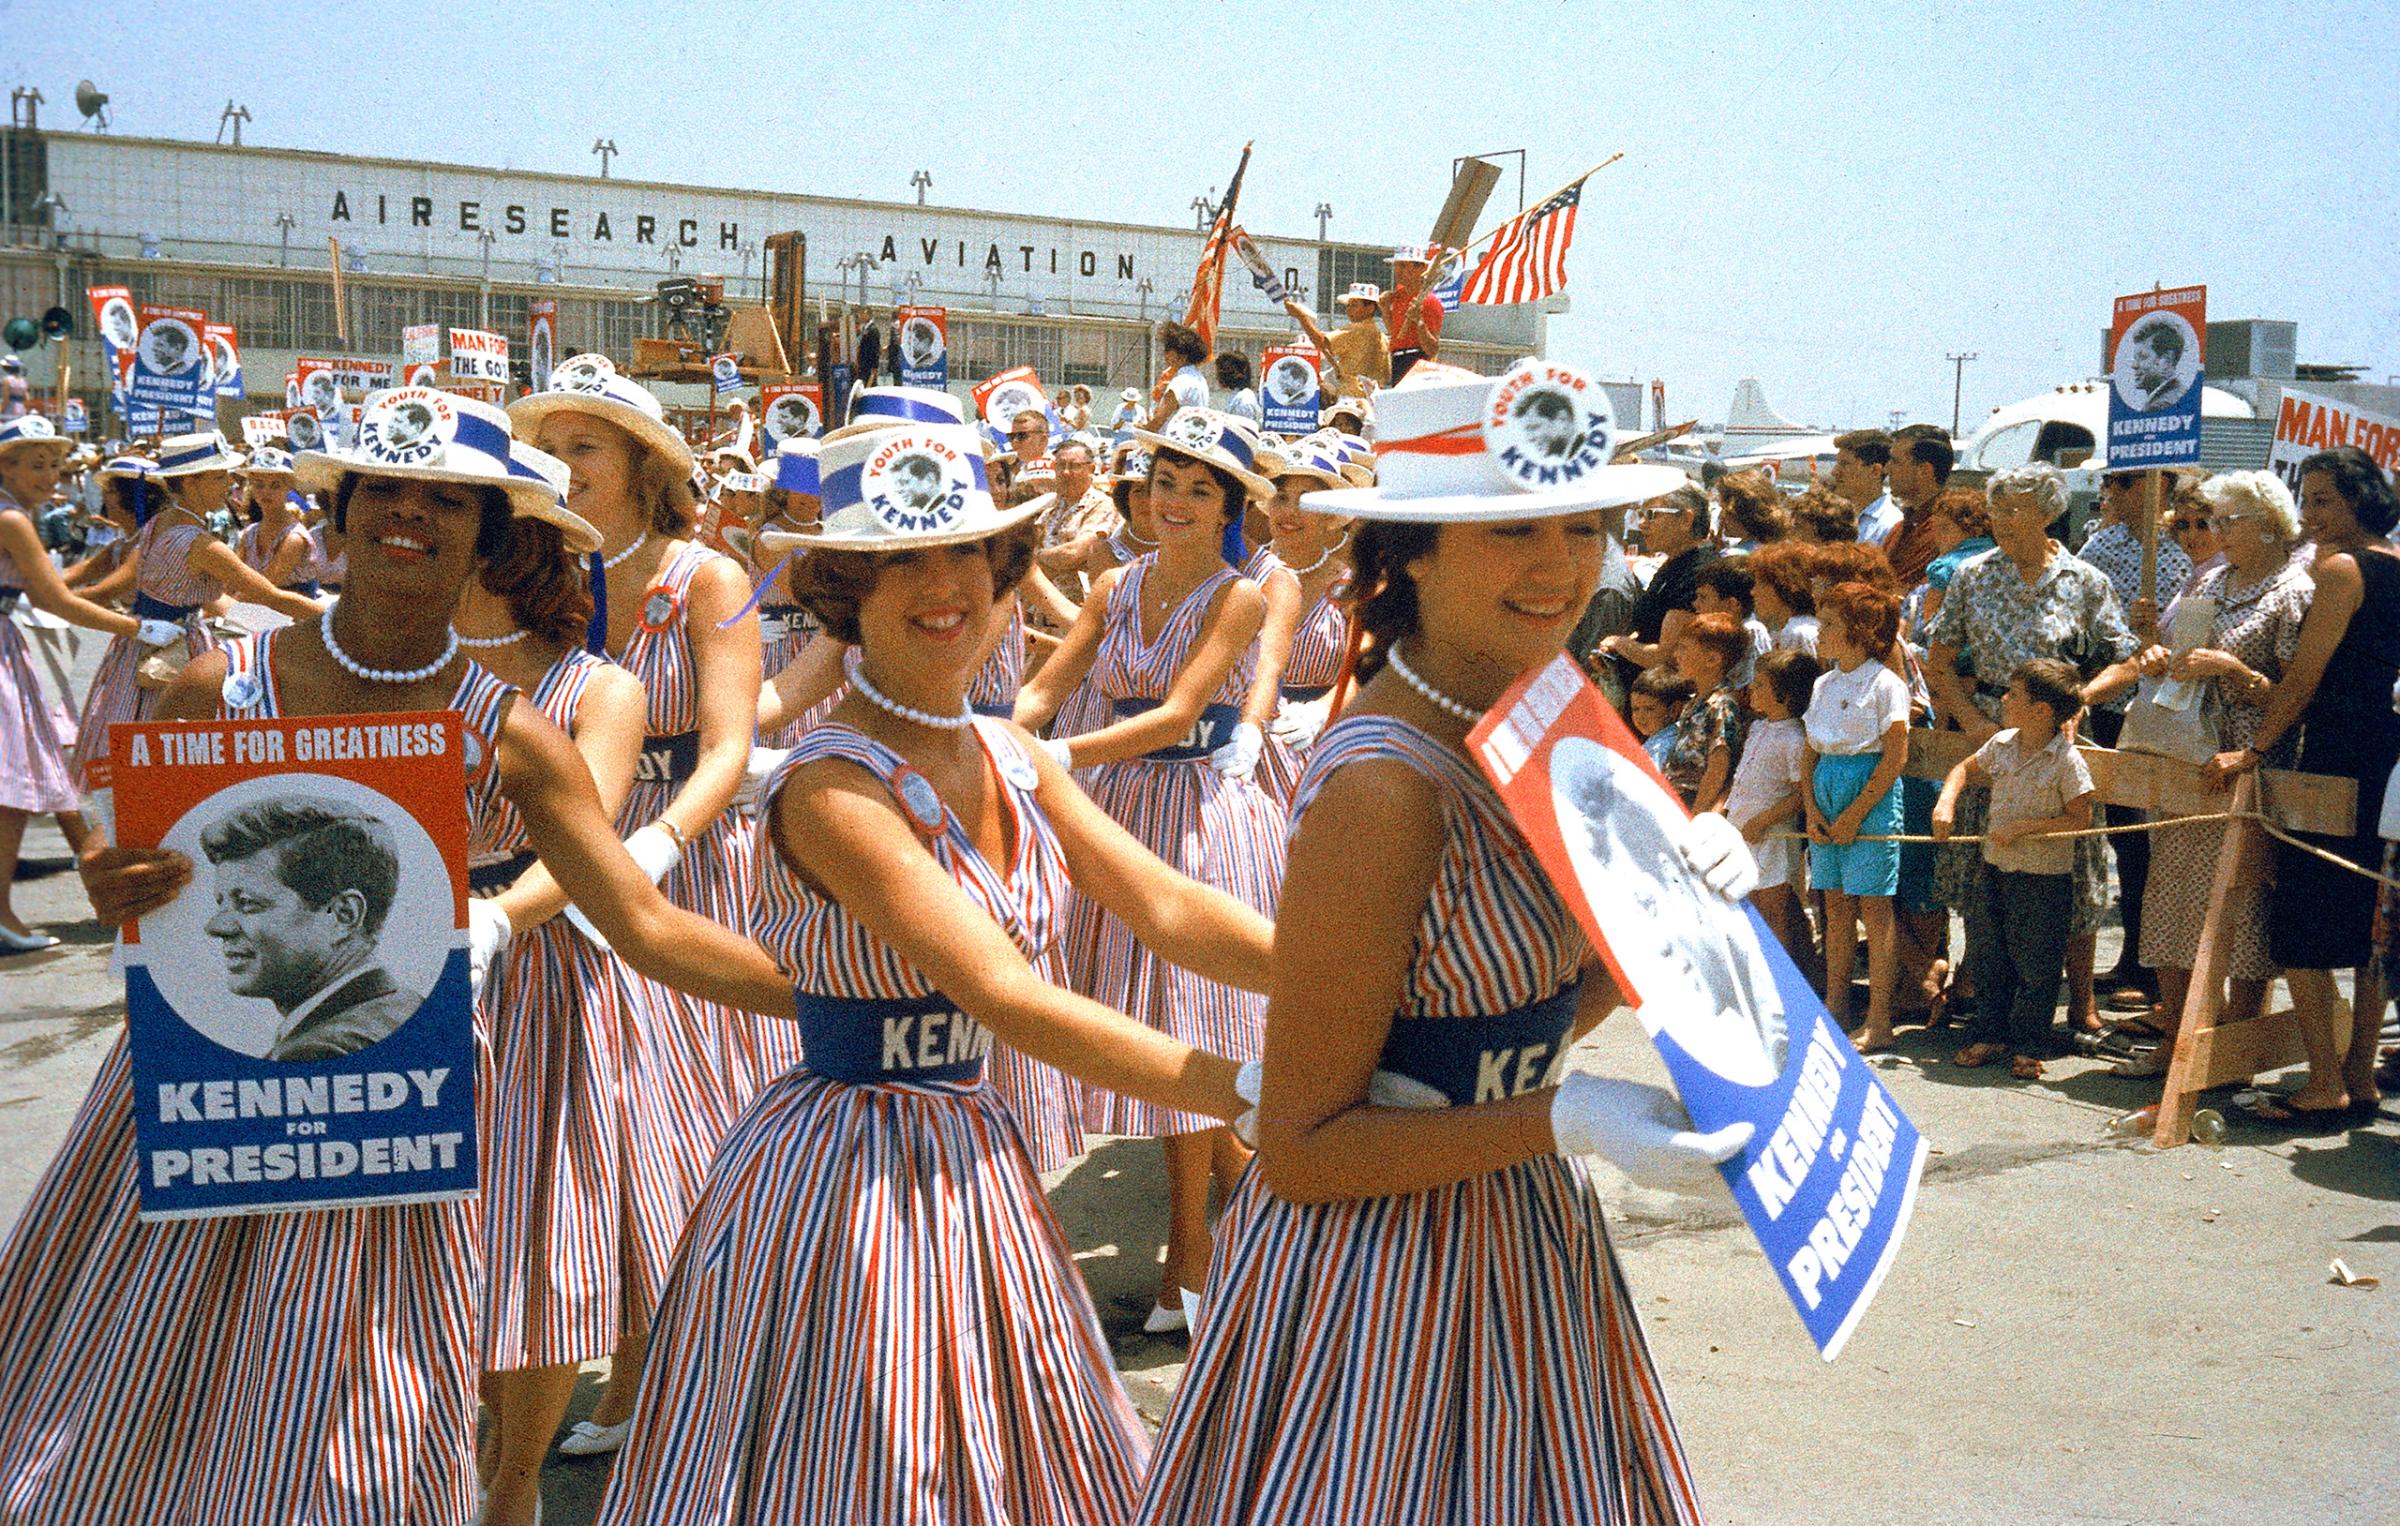 Female supporters of Democratic Presidential candidate John F. Kennedy, called "Kennedy Cuties" form a conga line at the airport while awaiting their candidate's arrival for the Democratic National Convention, 1960.